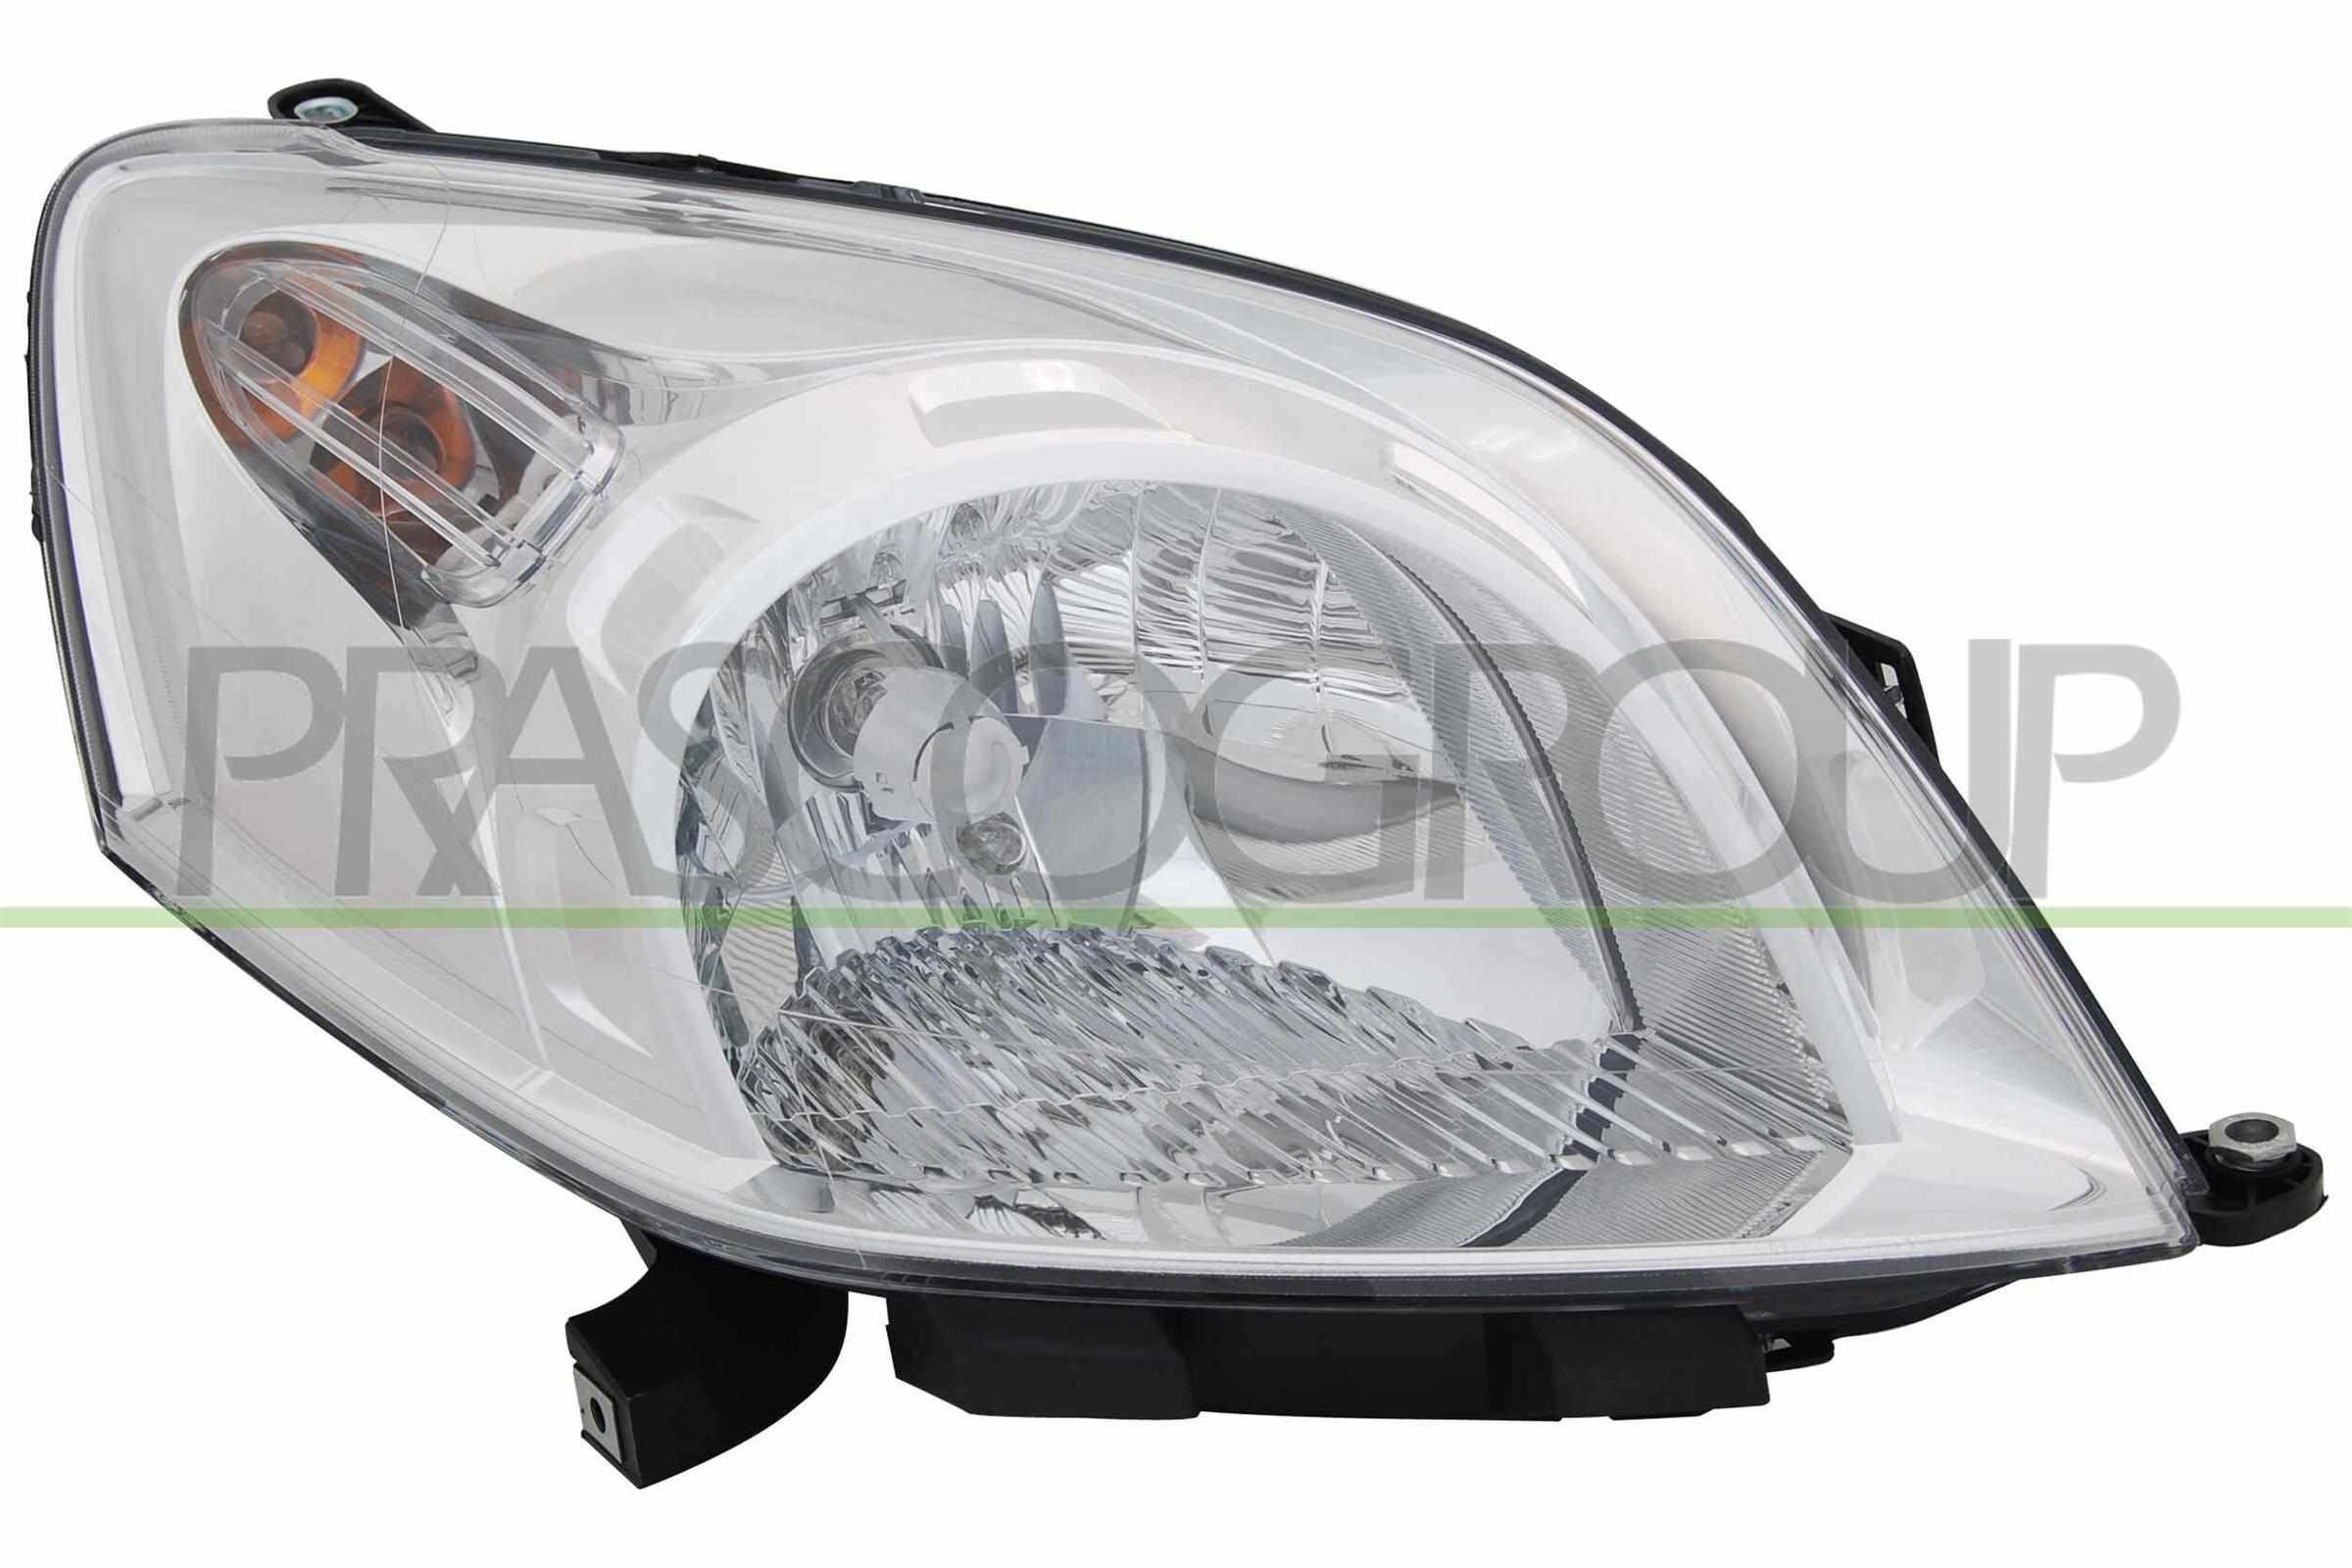 PRASCO FT9074813 Headlight Right, H4, with motor for headlamp levelling